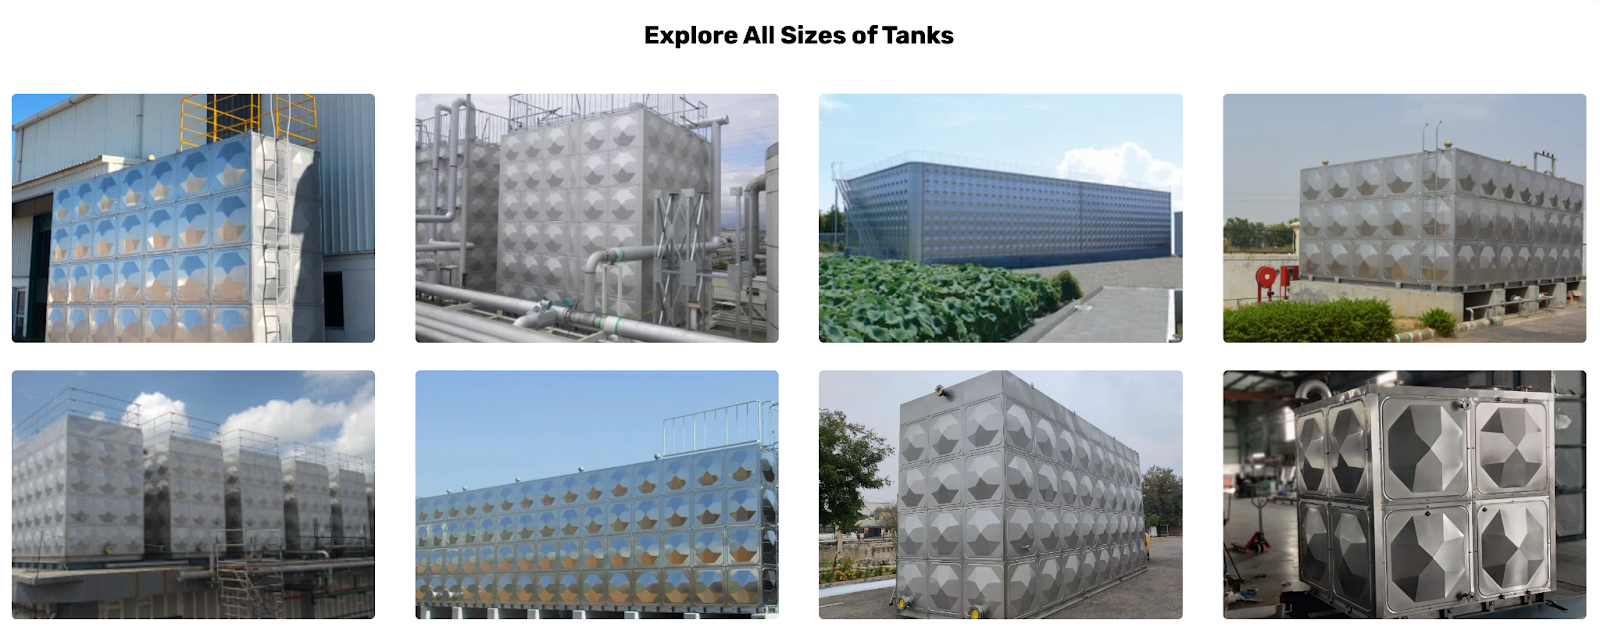 An image showing all sizes of Beltecno stainless steel industrial water storage tanks